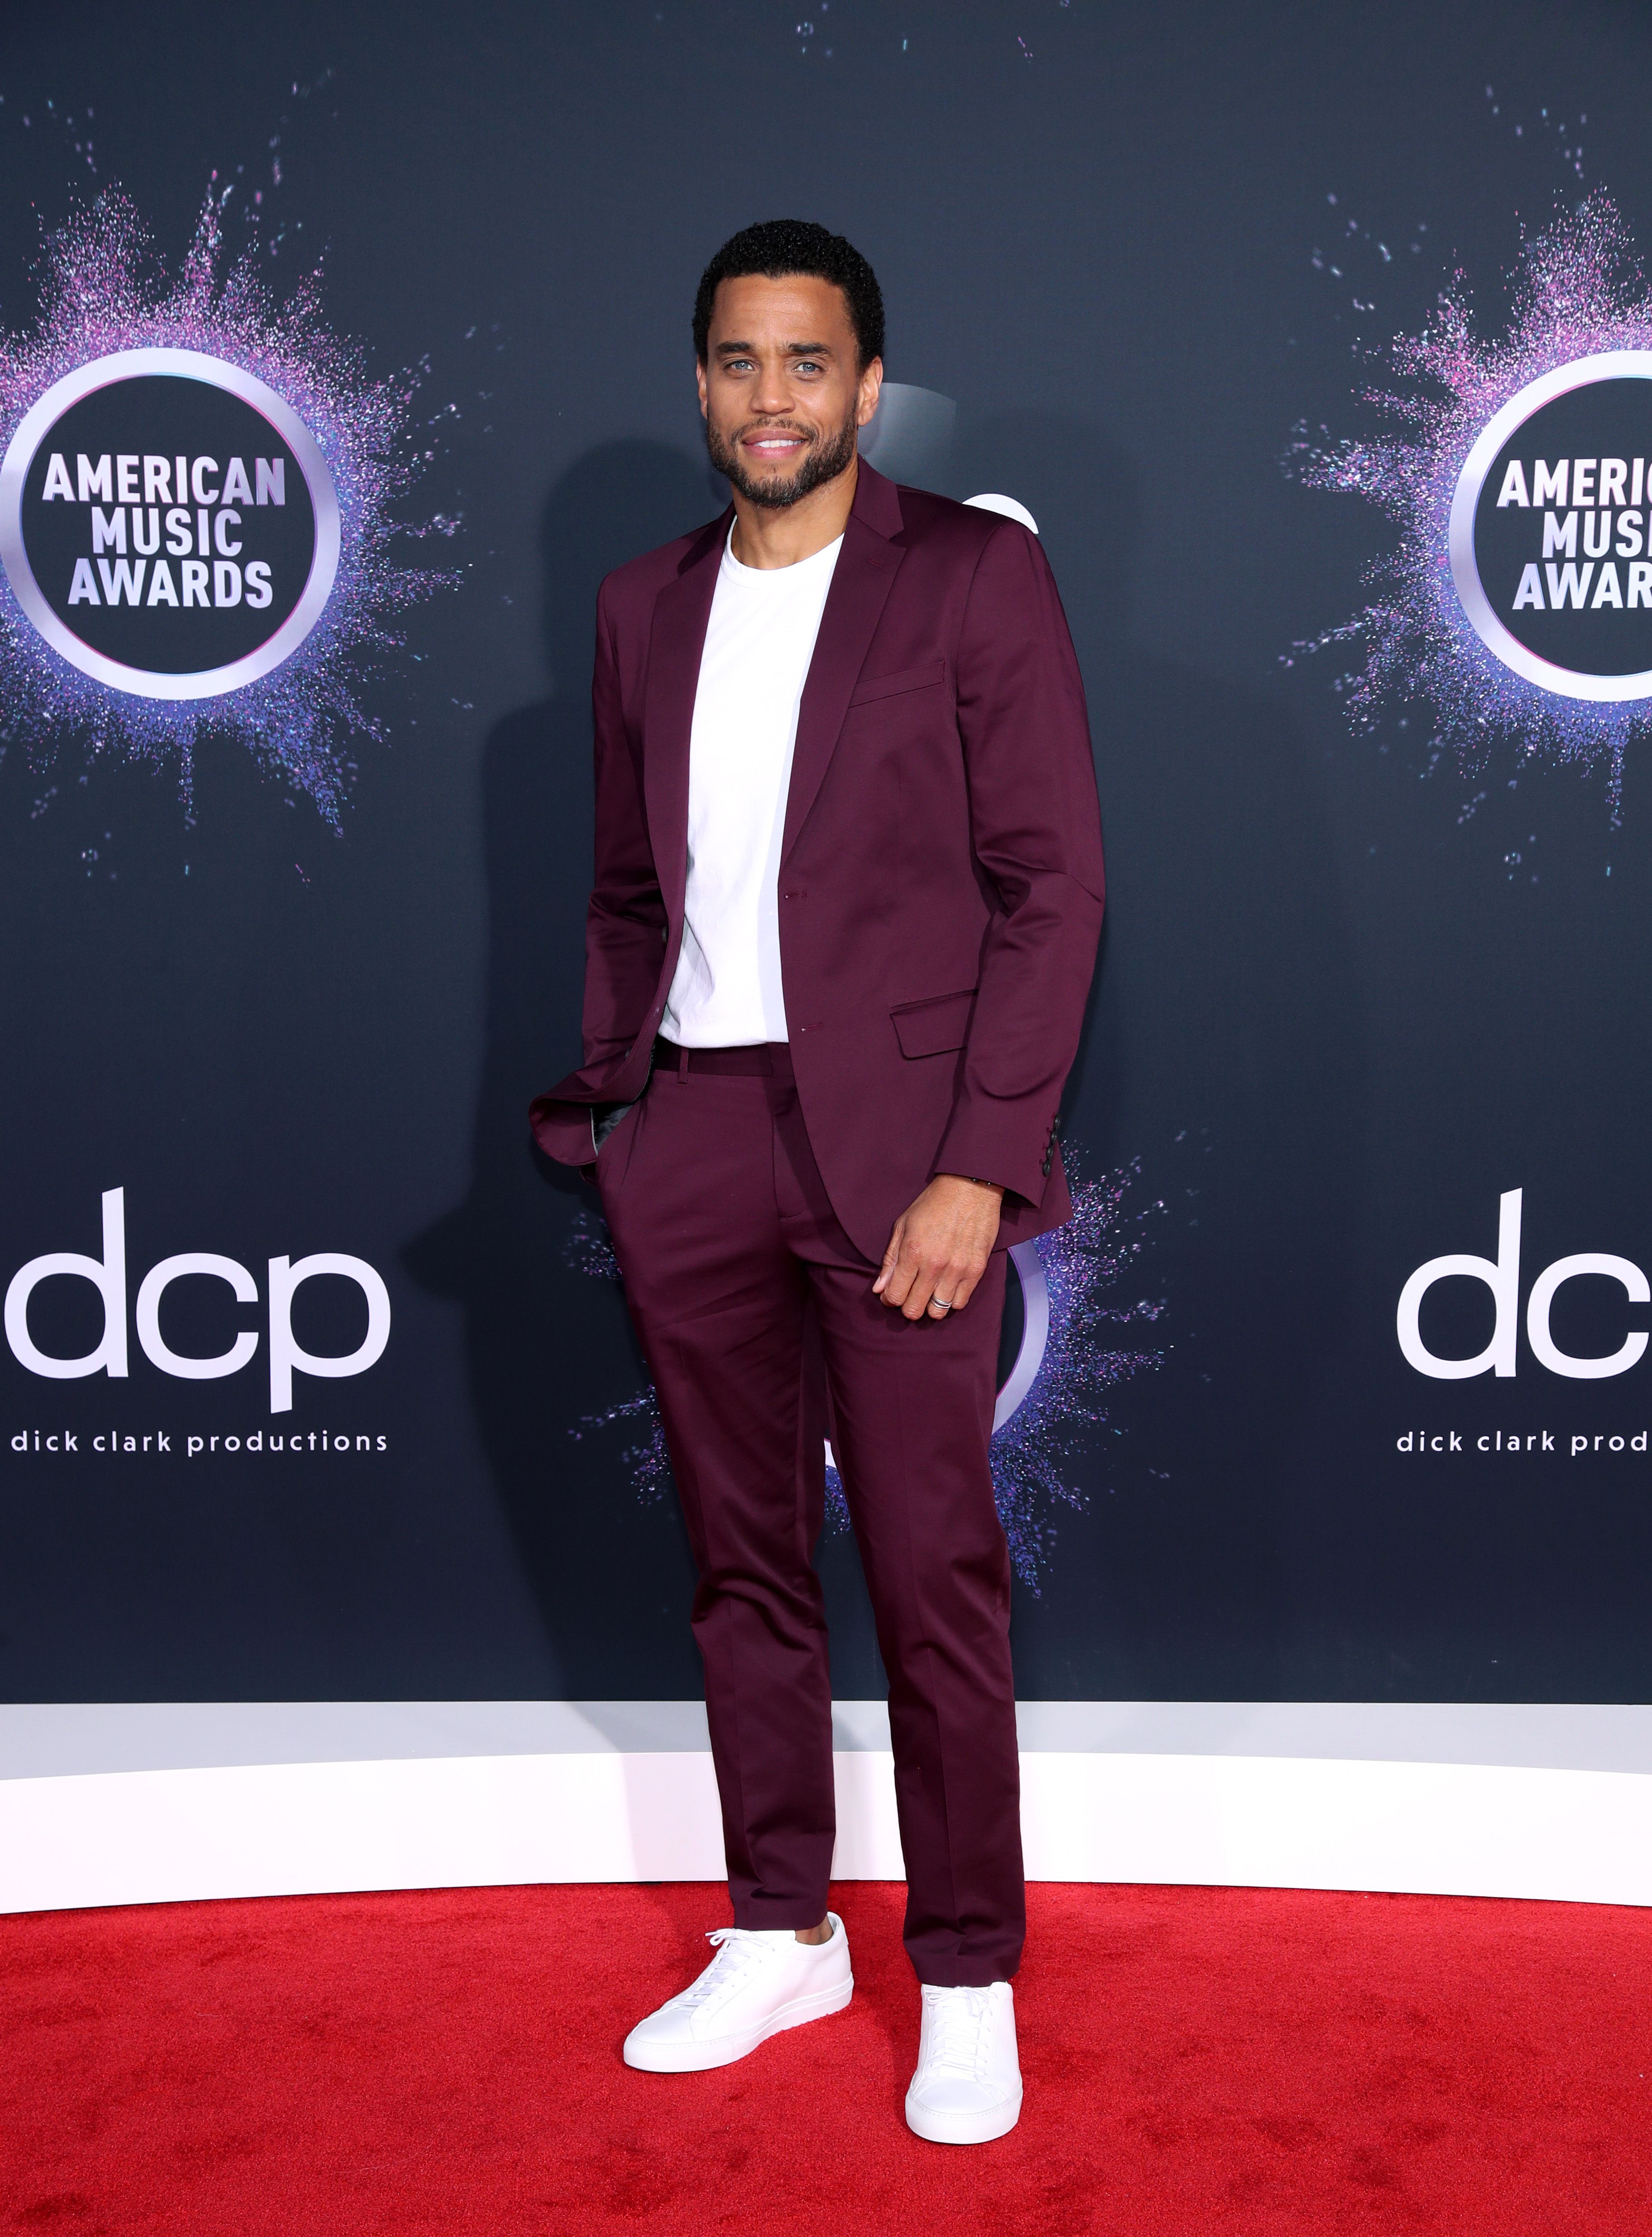 Harper presents award at AMAs in stylish suit